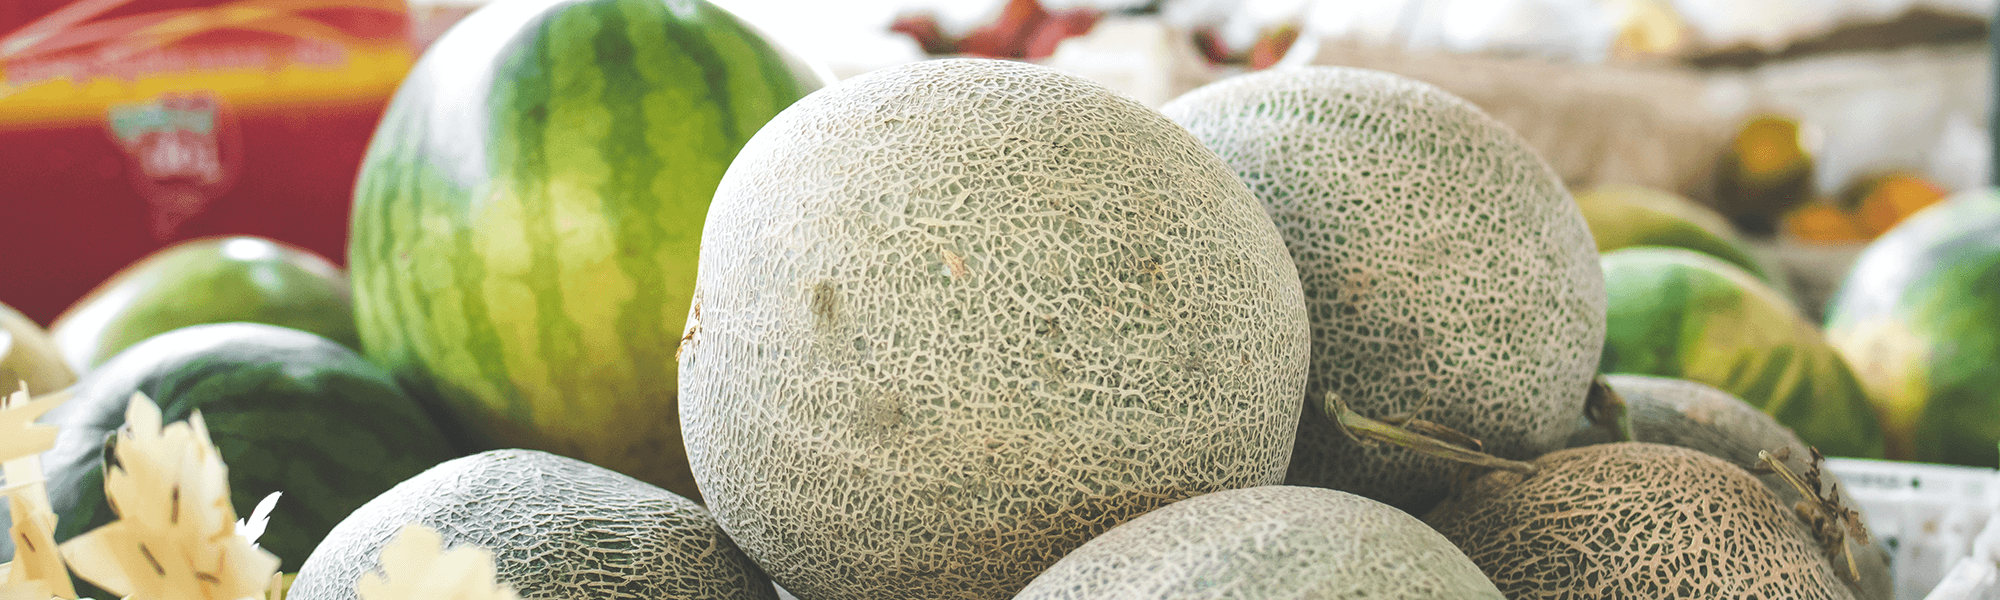 Photograph of Melons